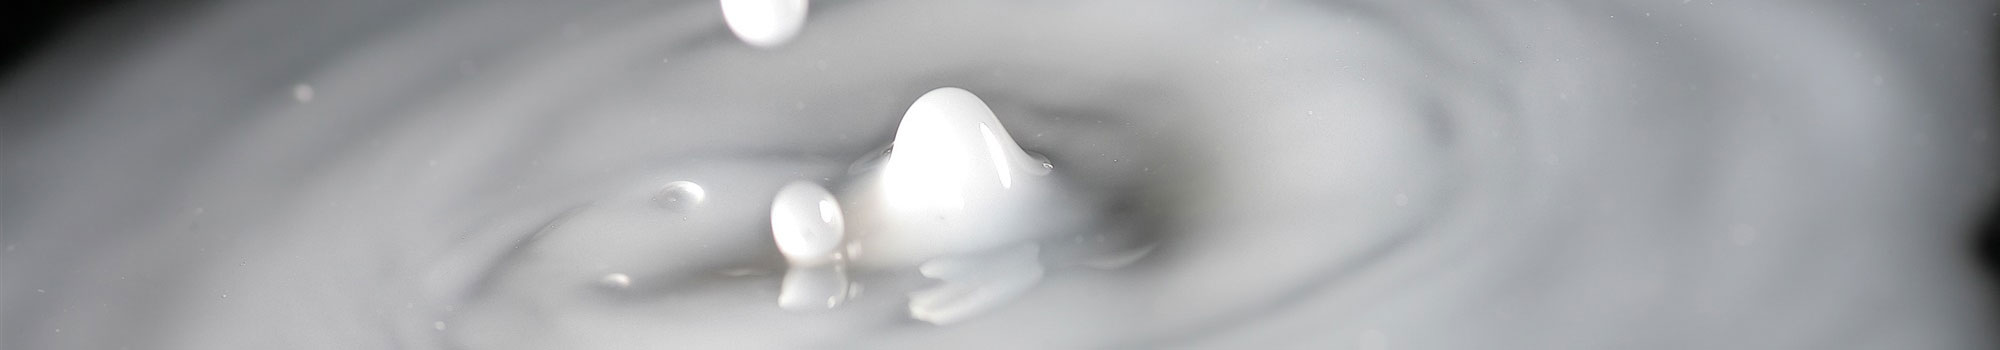 Image of milky water